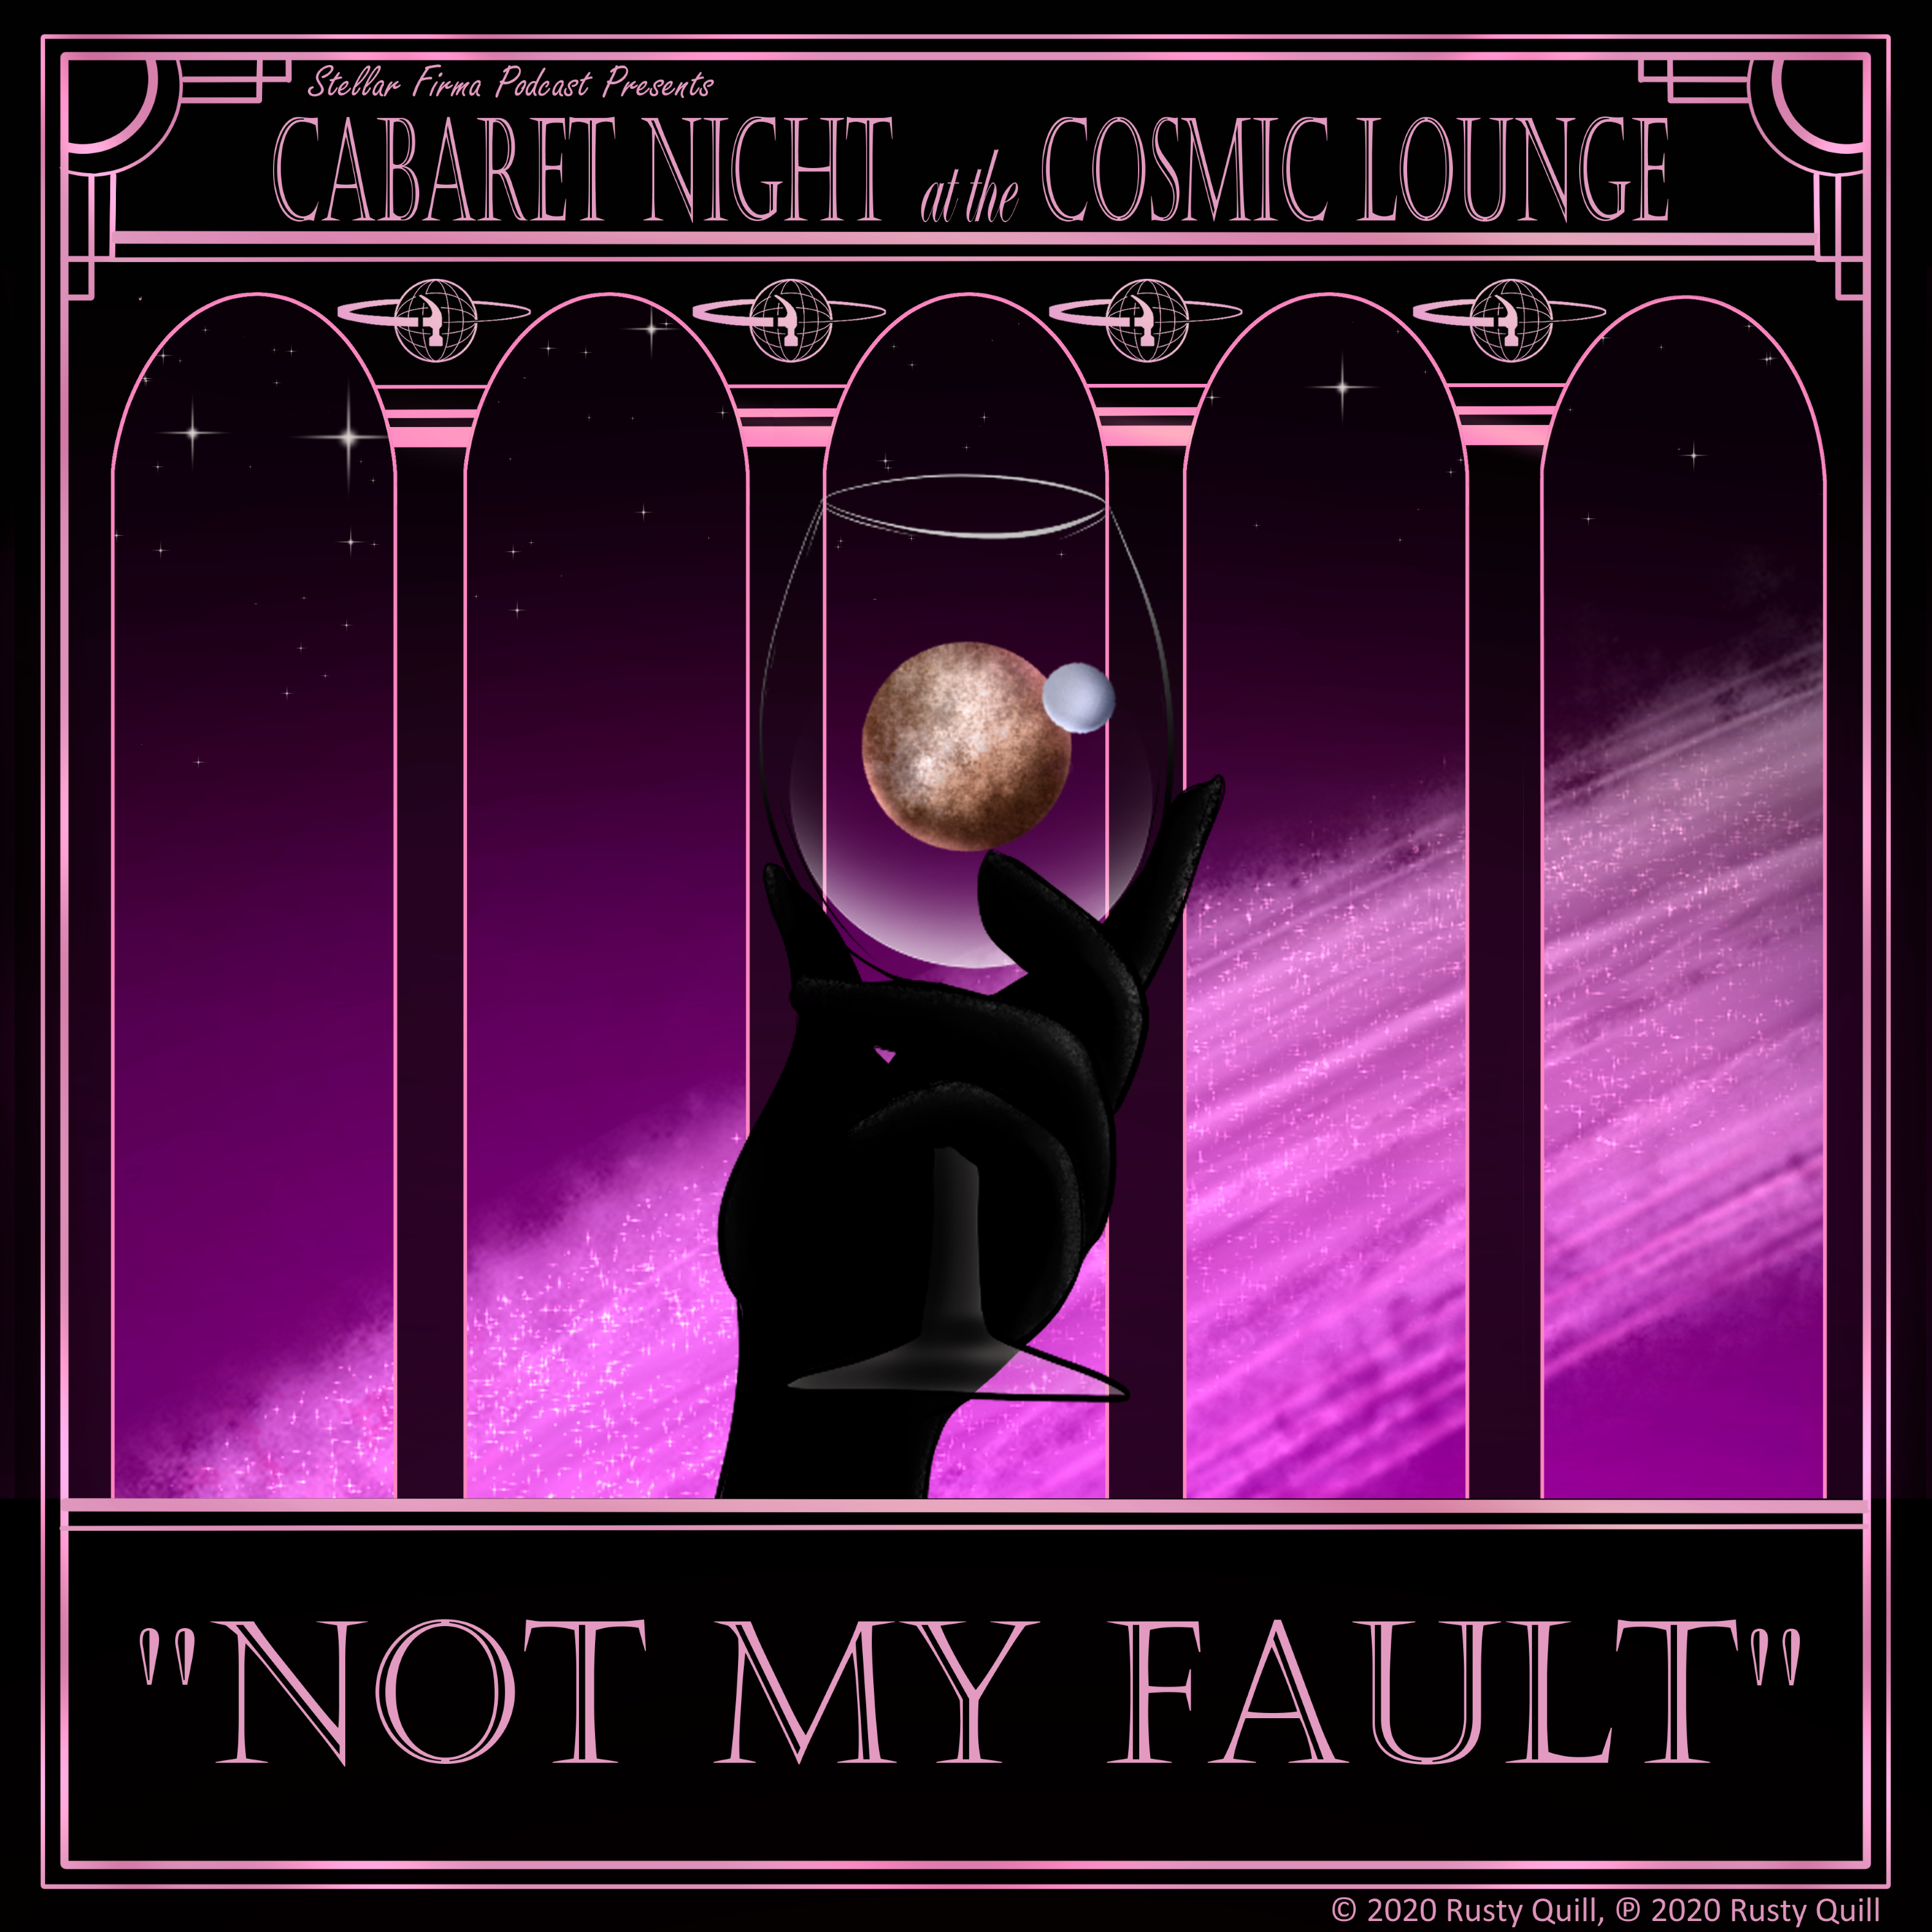 Cabaret Night at the Cosmic Lounge: Not My Fault